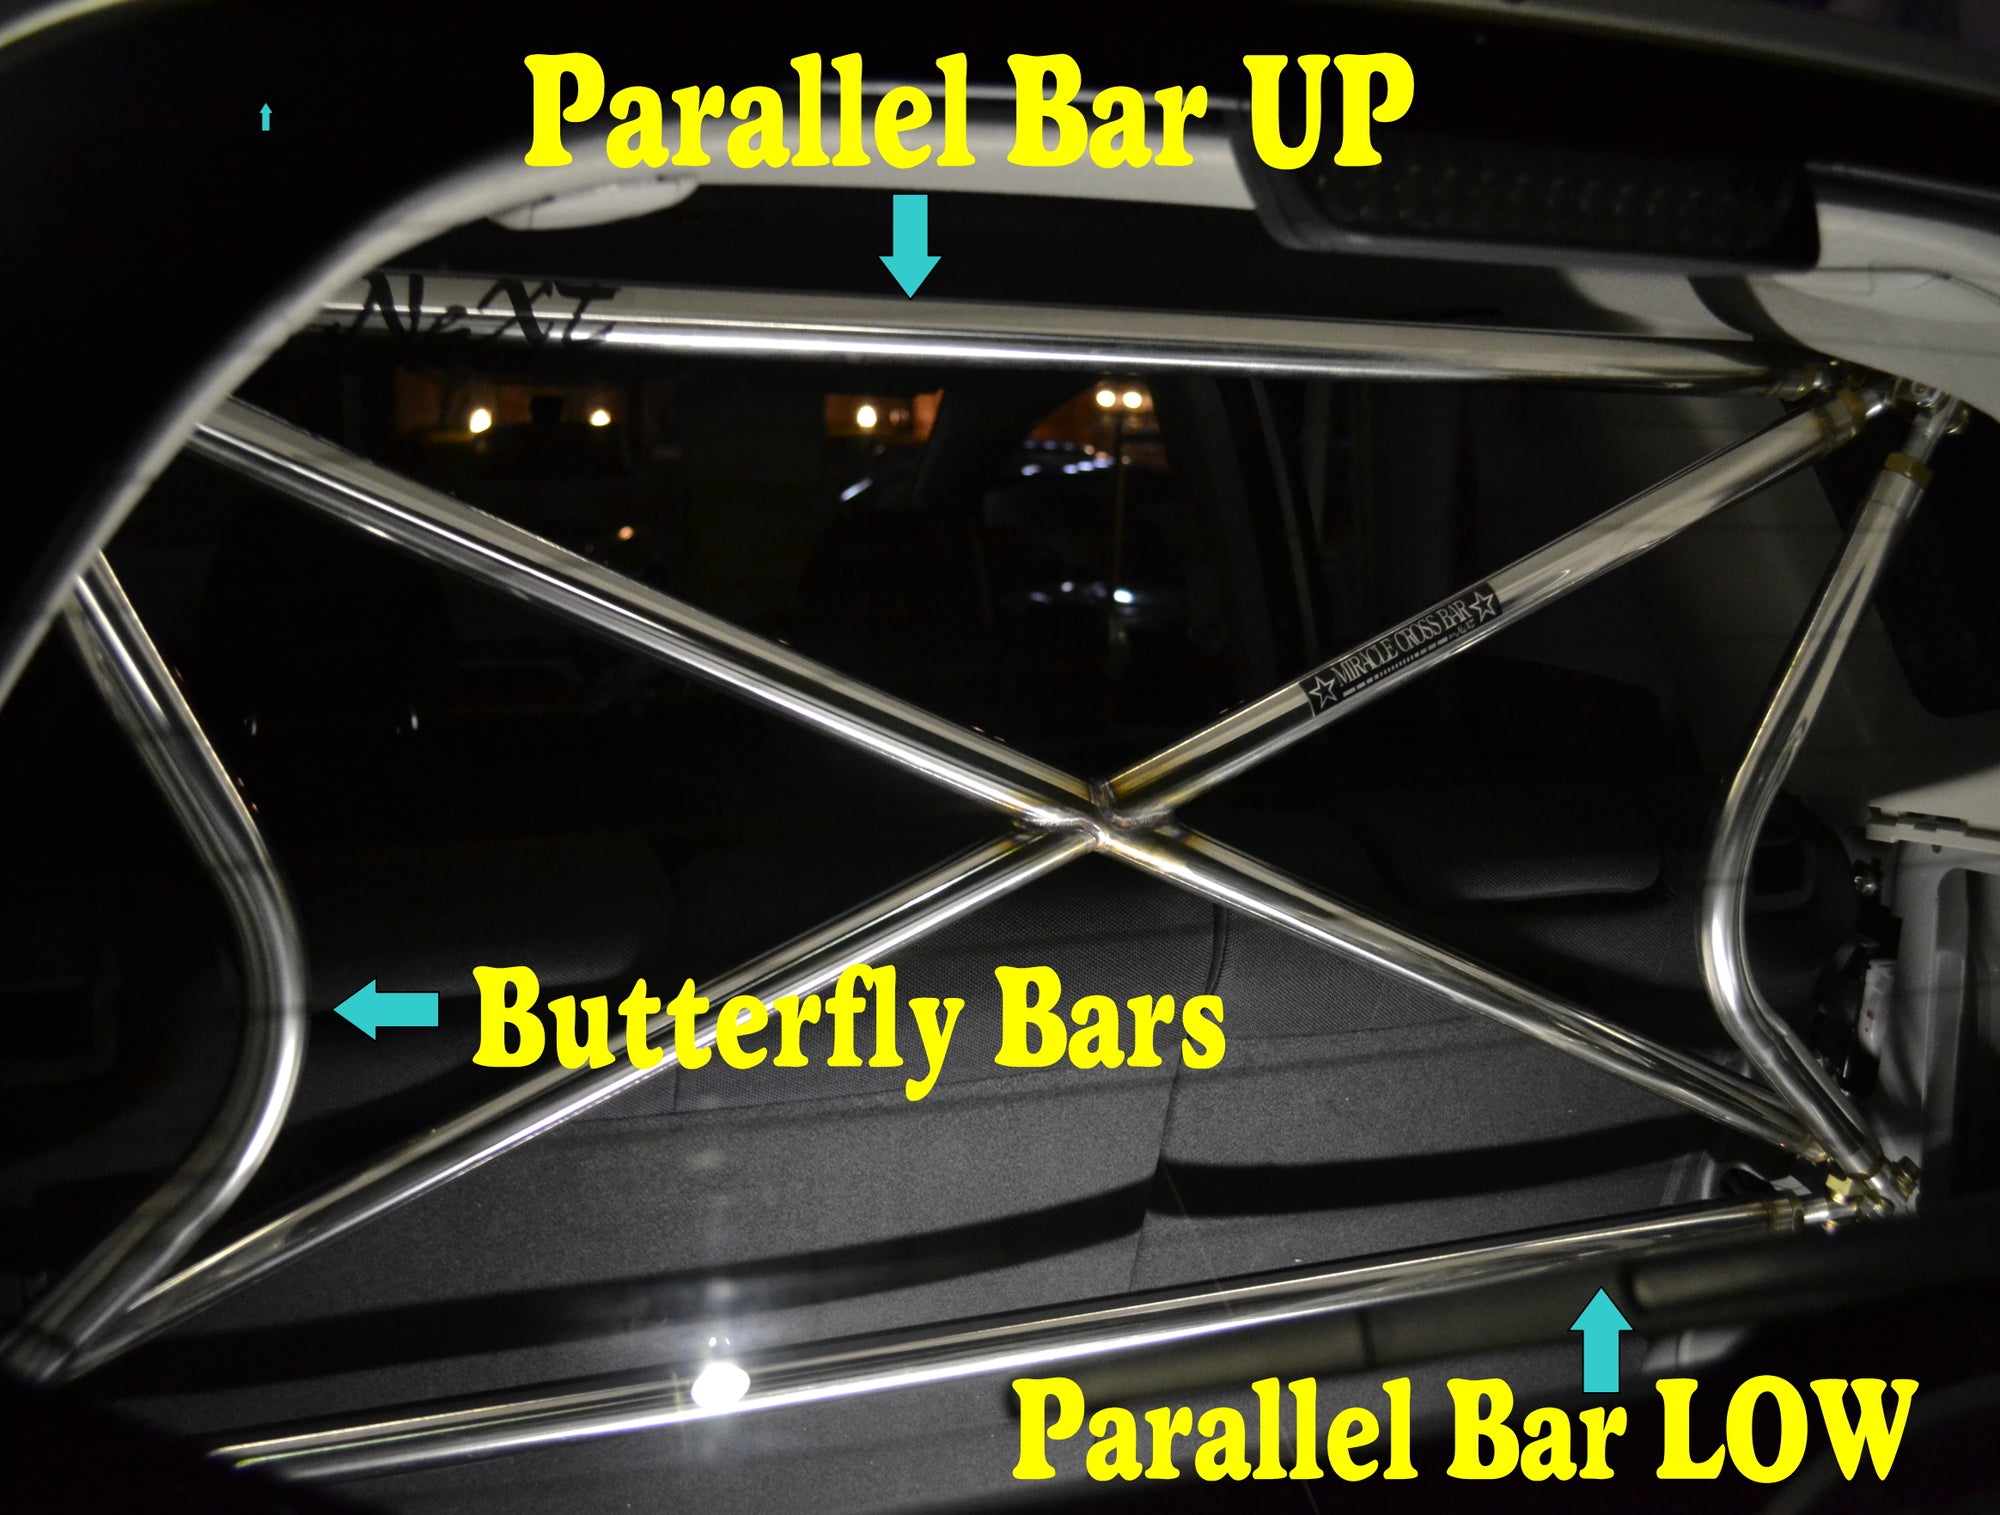 NEXT MIRACLE CROSS BAR BUTTERFLY BAR RIGHT & LEFT STAINLESS 32 FOR MITSUBISHI LANCER EVOLUTION 4 5 6 NEXT-01264